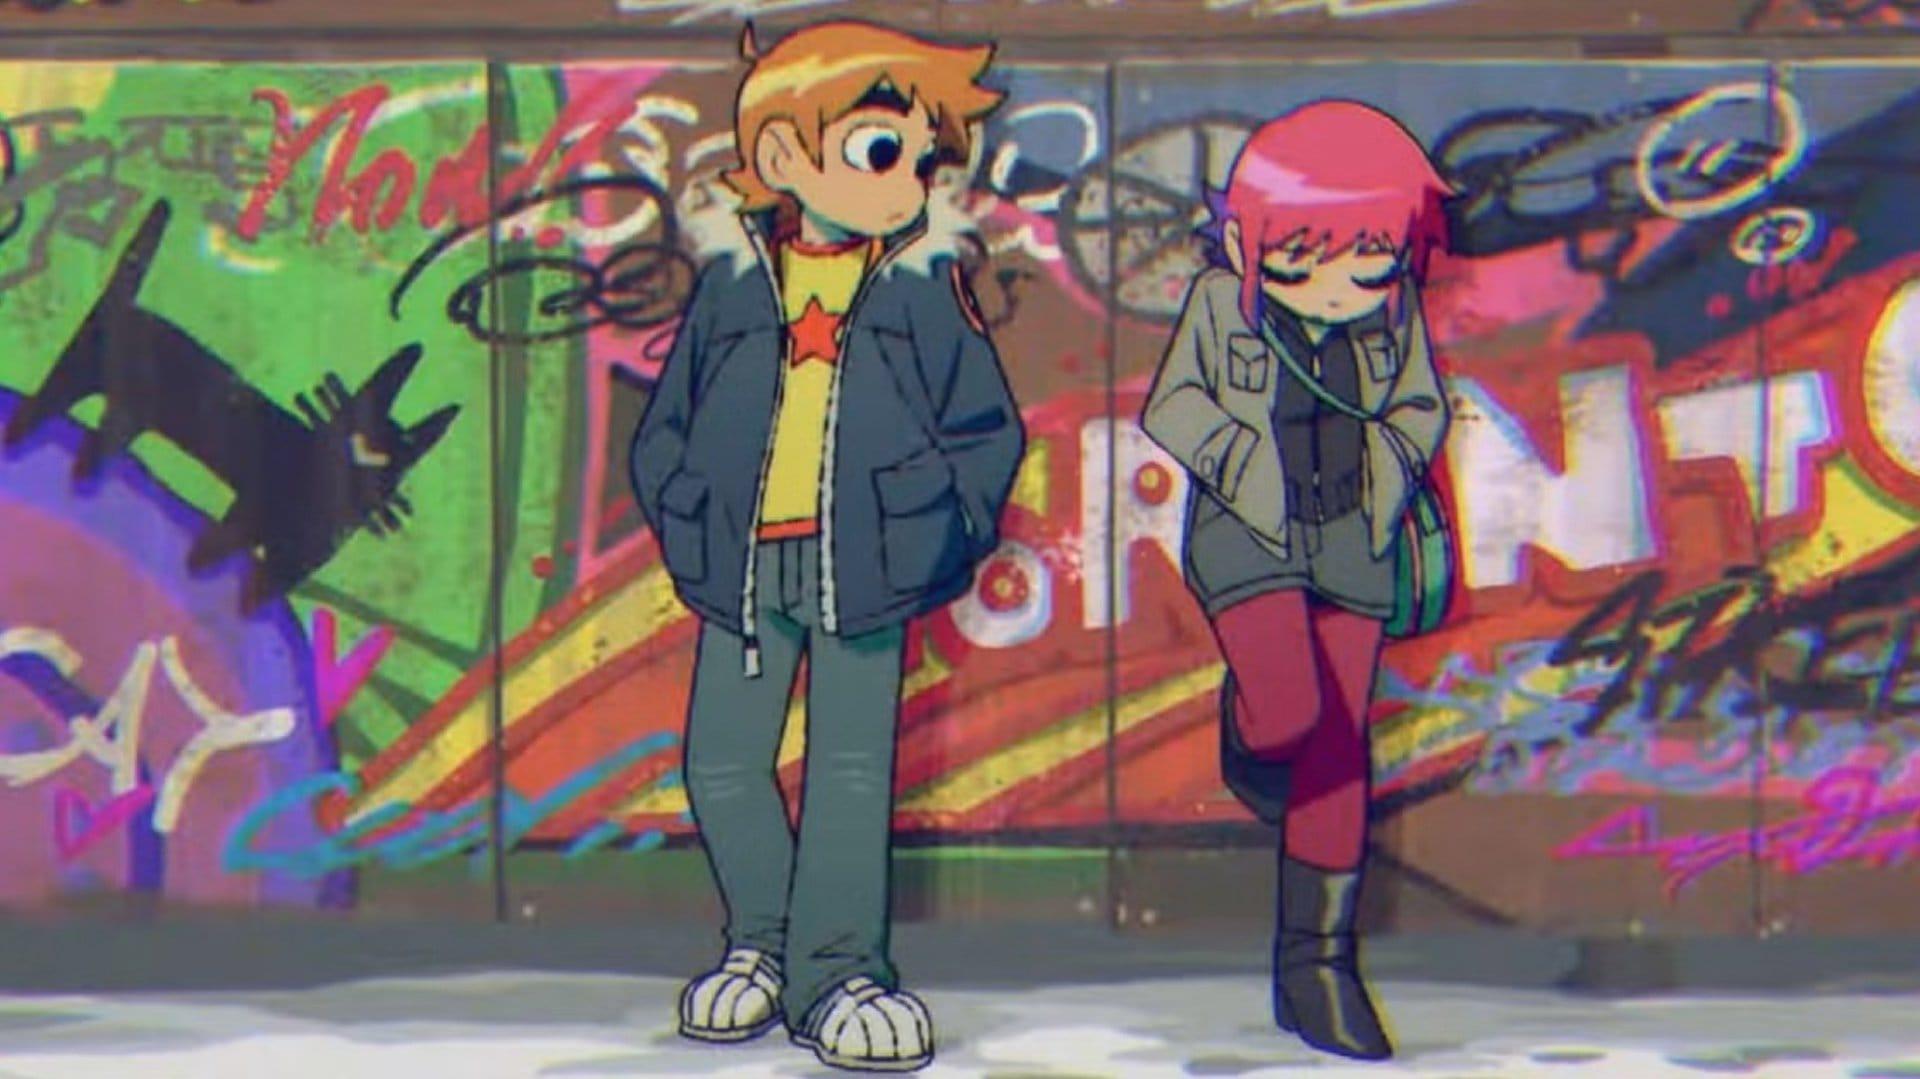 Check Out The Fun Anime Style Scott Pilgrim Takes Off Opening